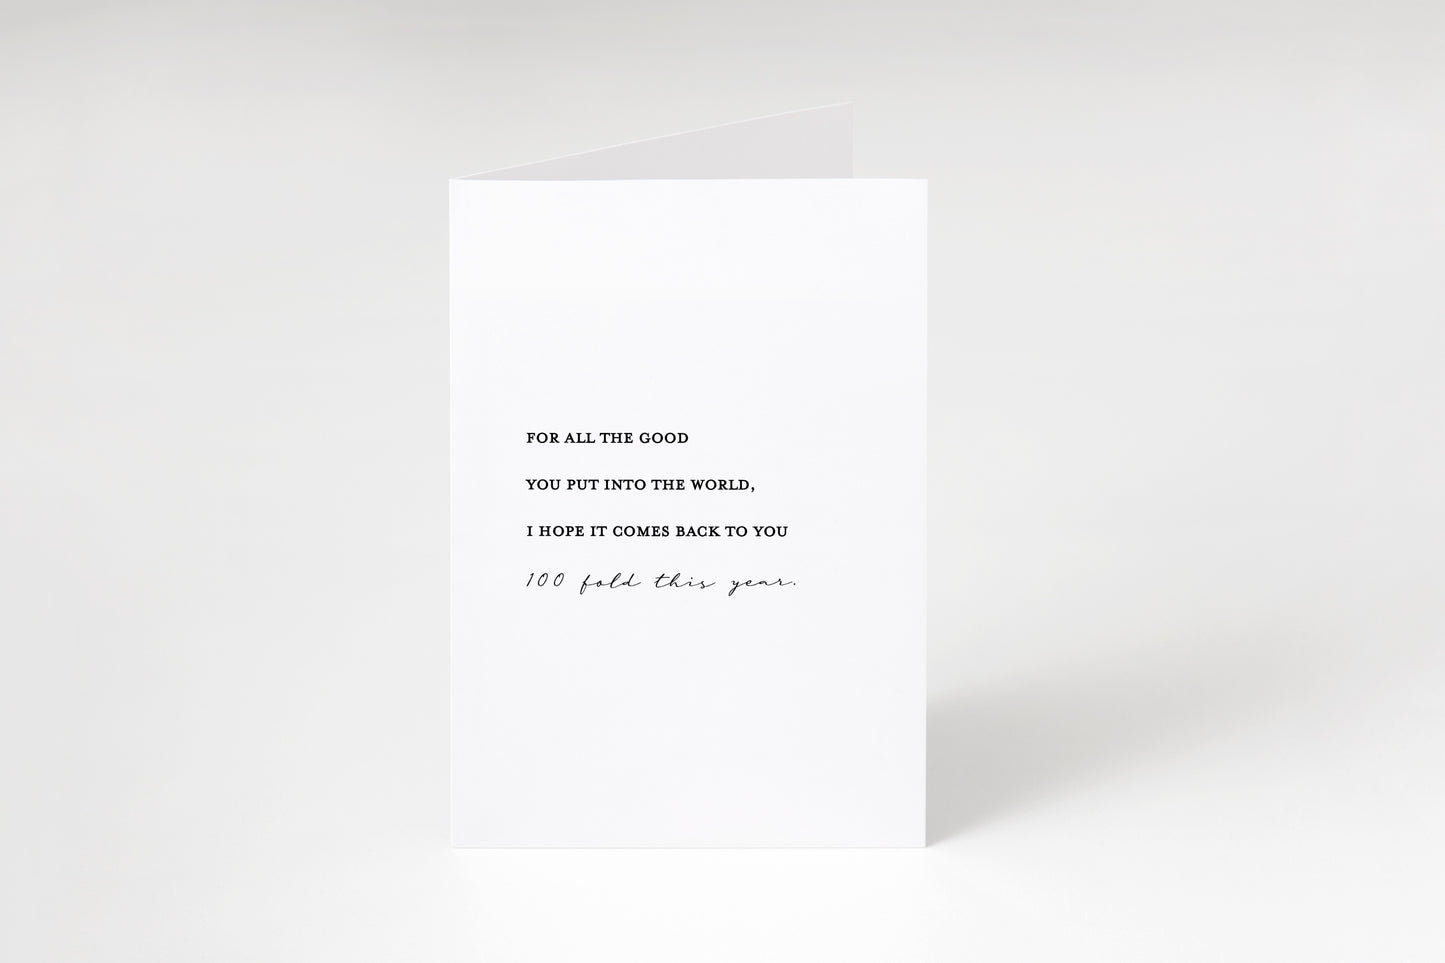 For all the good you put into the world,100 fold,Thank you card,Encouraging note,Birthday card,Support card,Thank you note,Appreciation card